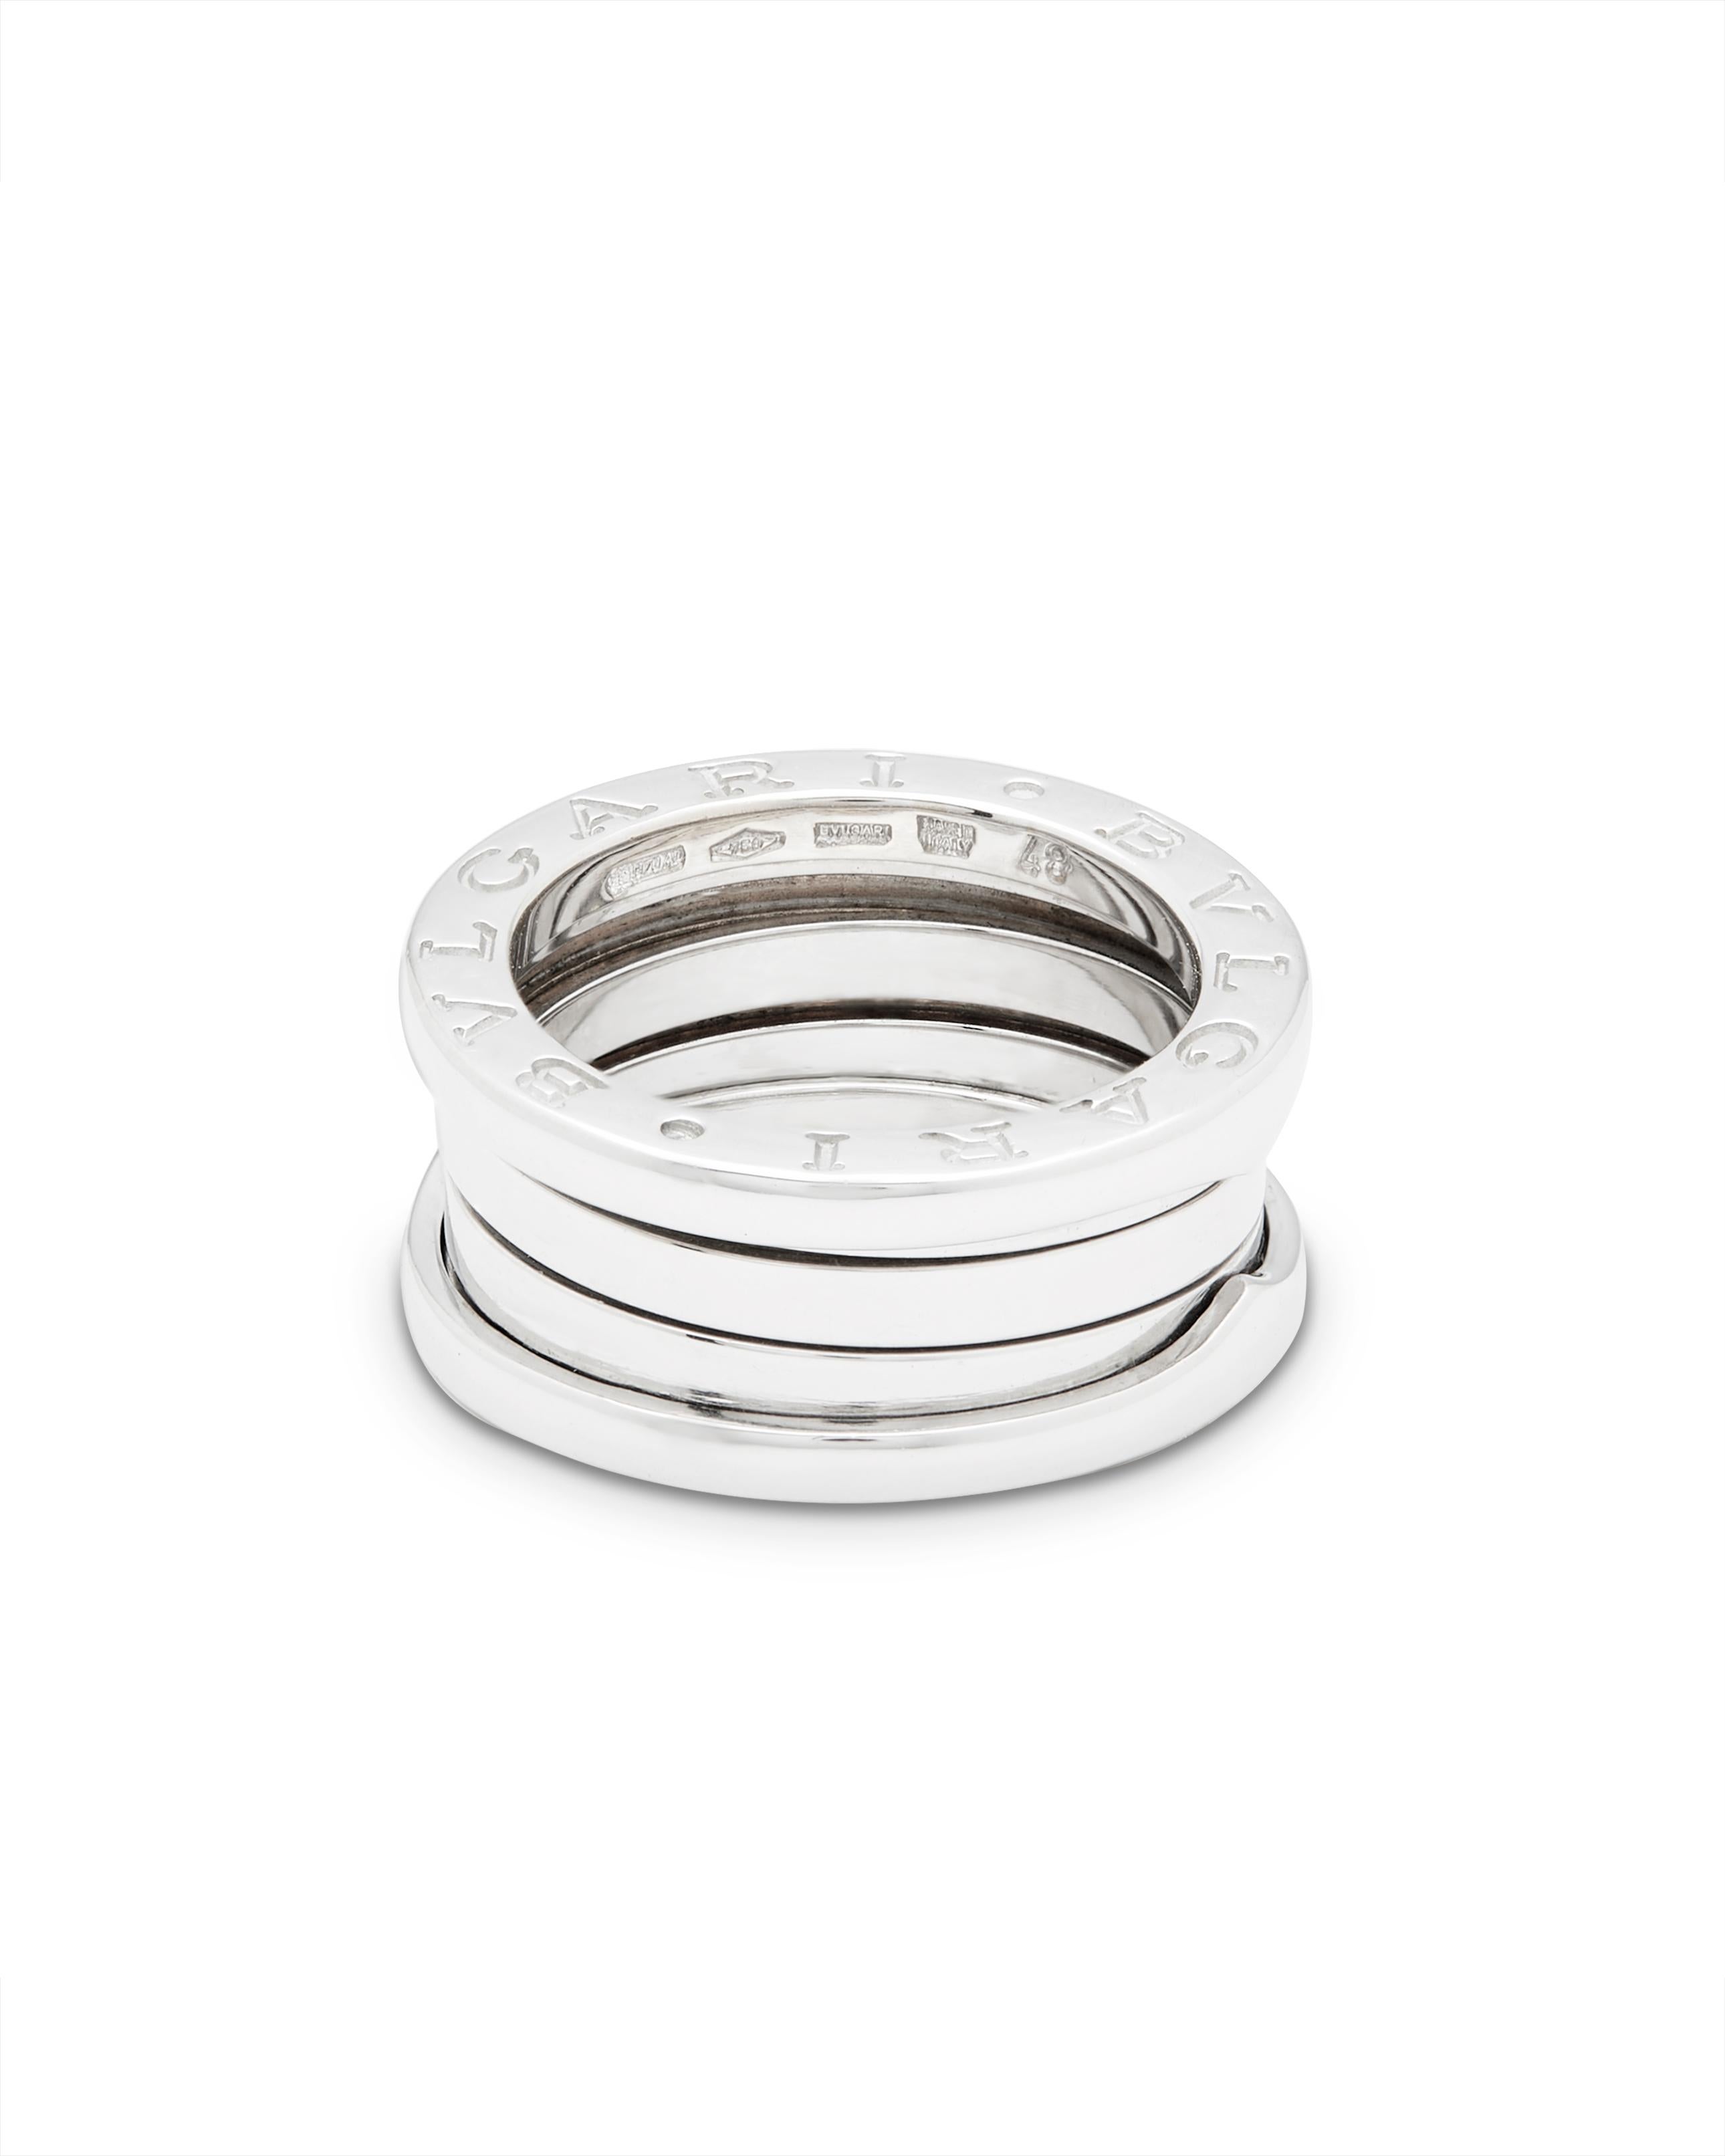 Beautiful Bulgari Genuine B Zero ring.

Set in 18ct white gold.
Drawing all its inspiration from the most renowned amphitheater of the world. The Colosseum, the B.zero1 ring is a true statement of Bulgari’s creative vision.

Signed Bvlgari
Size 48